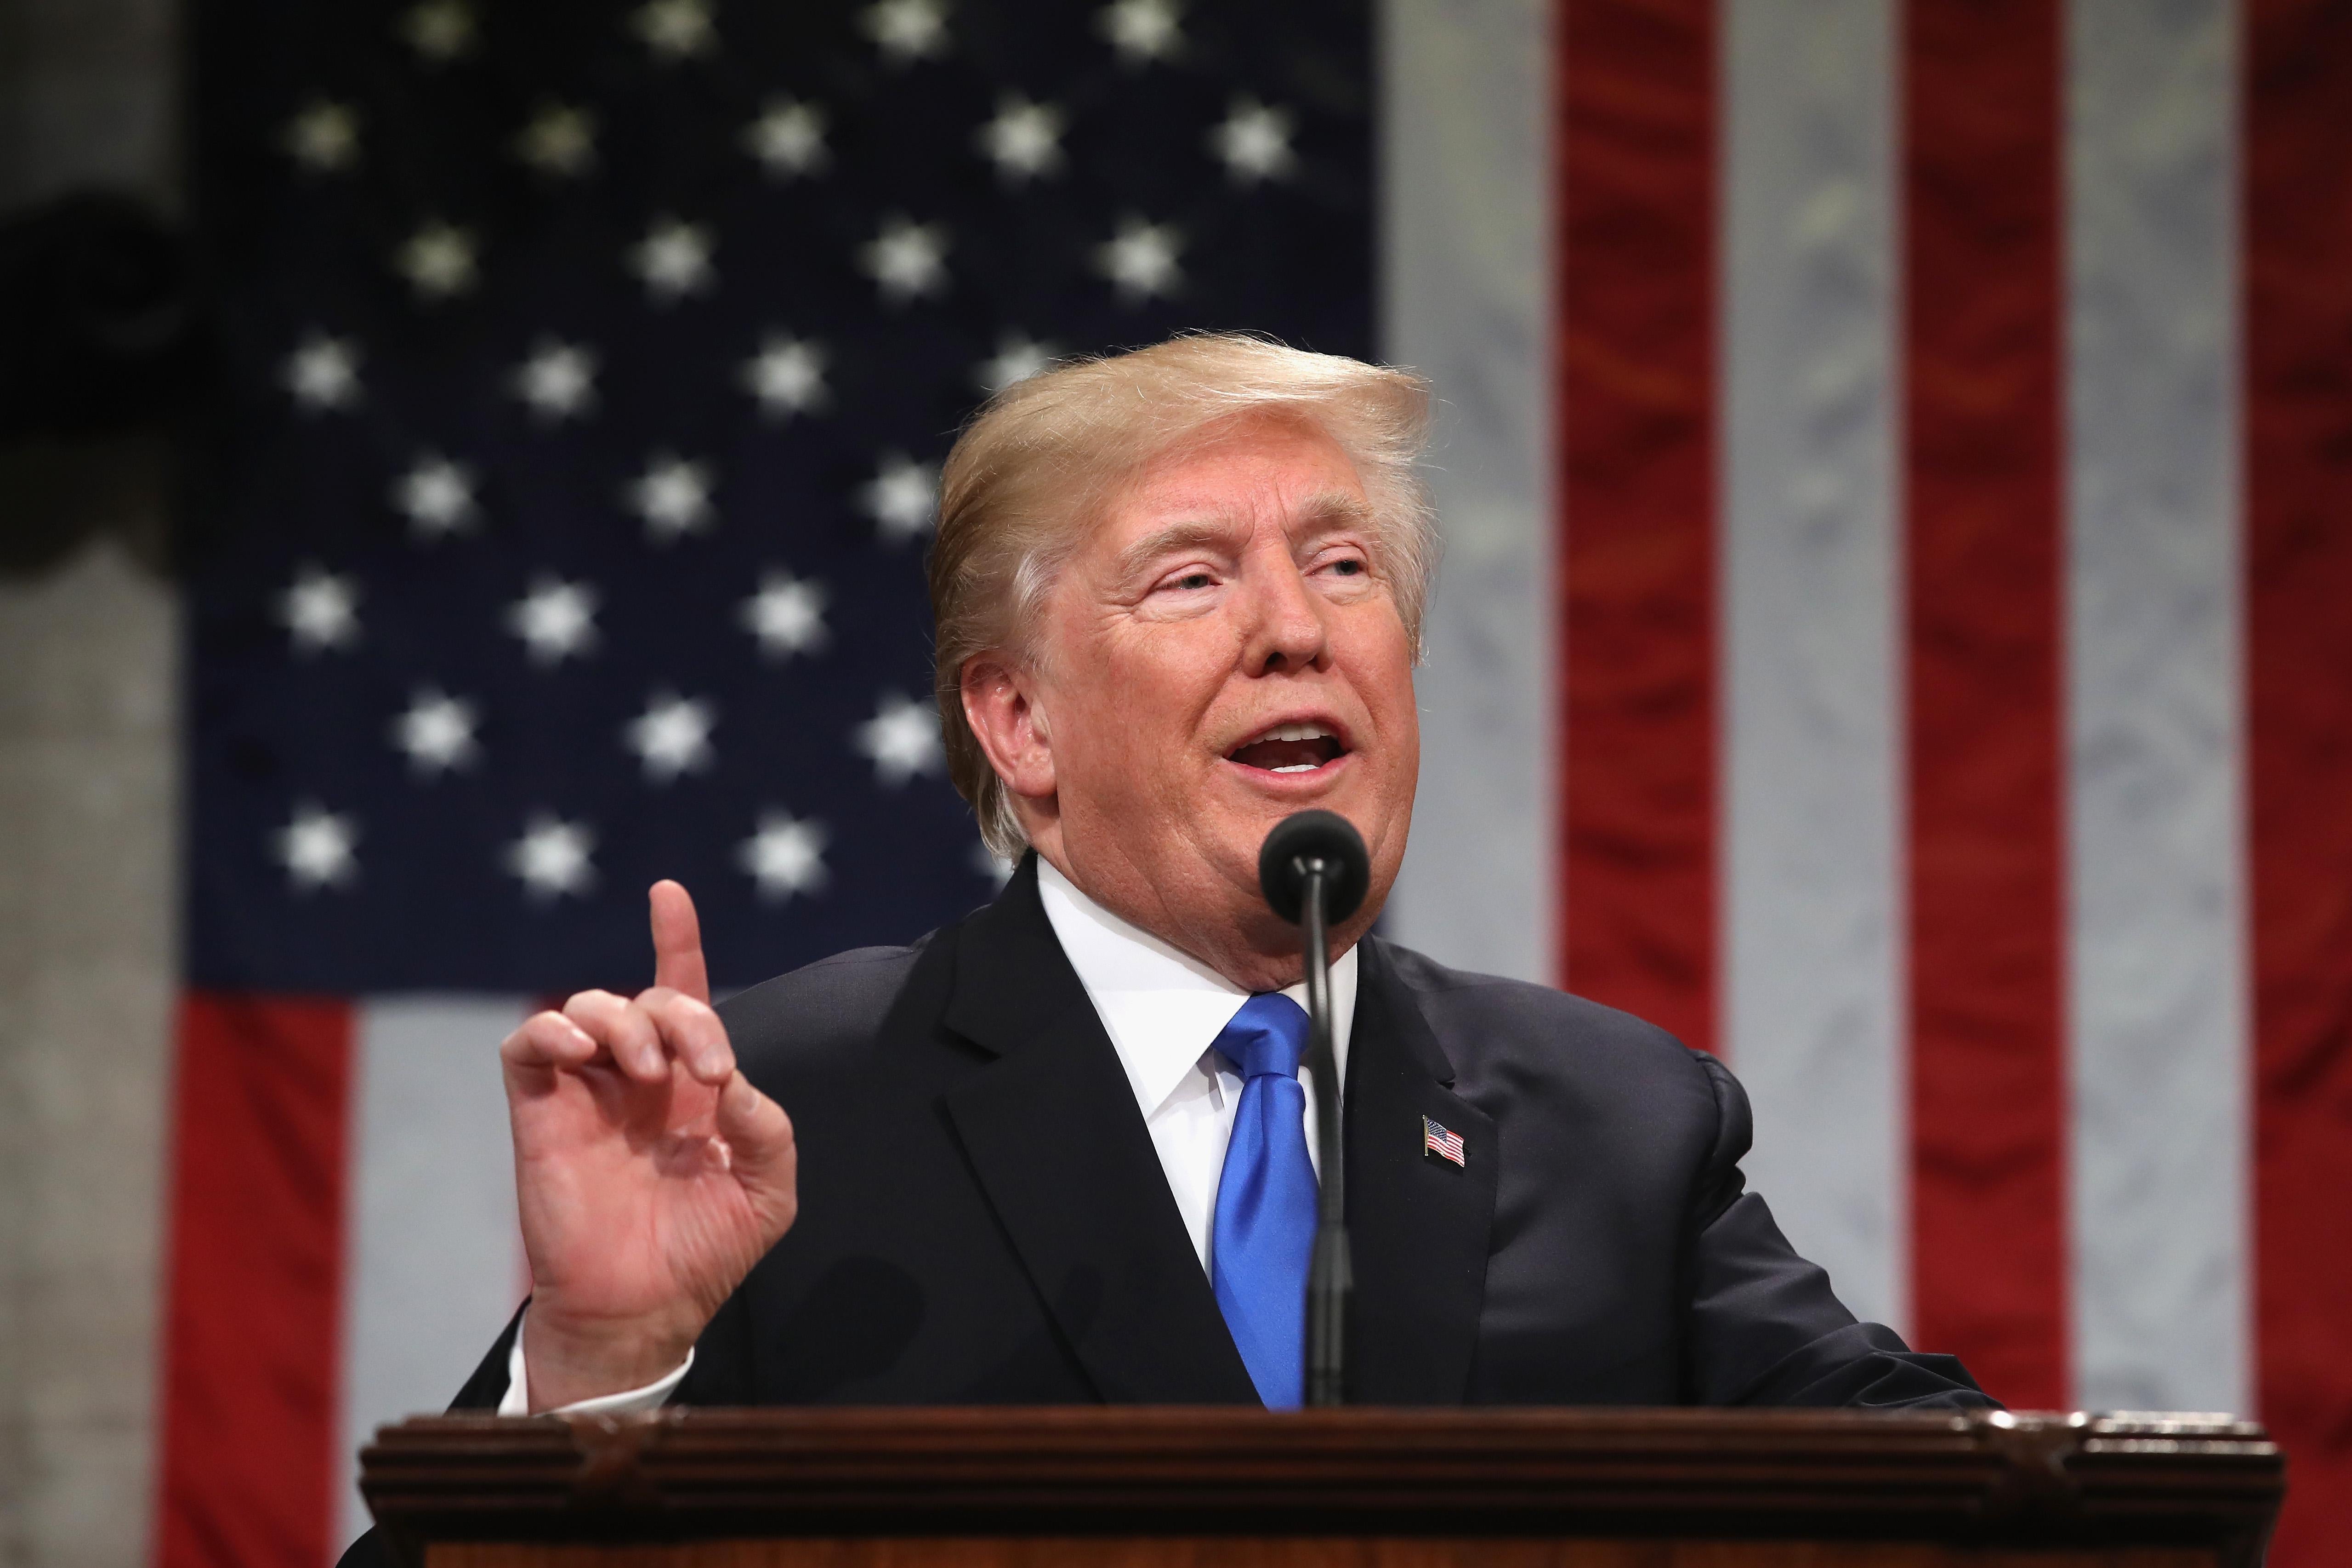 President Trump delivering his 2018 State of the Union address.